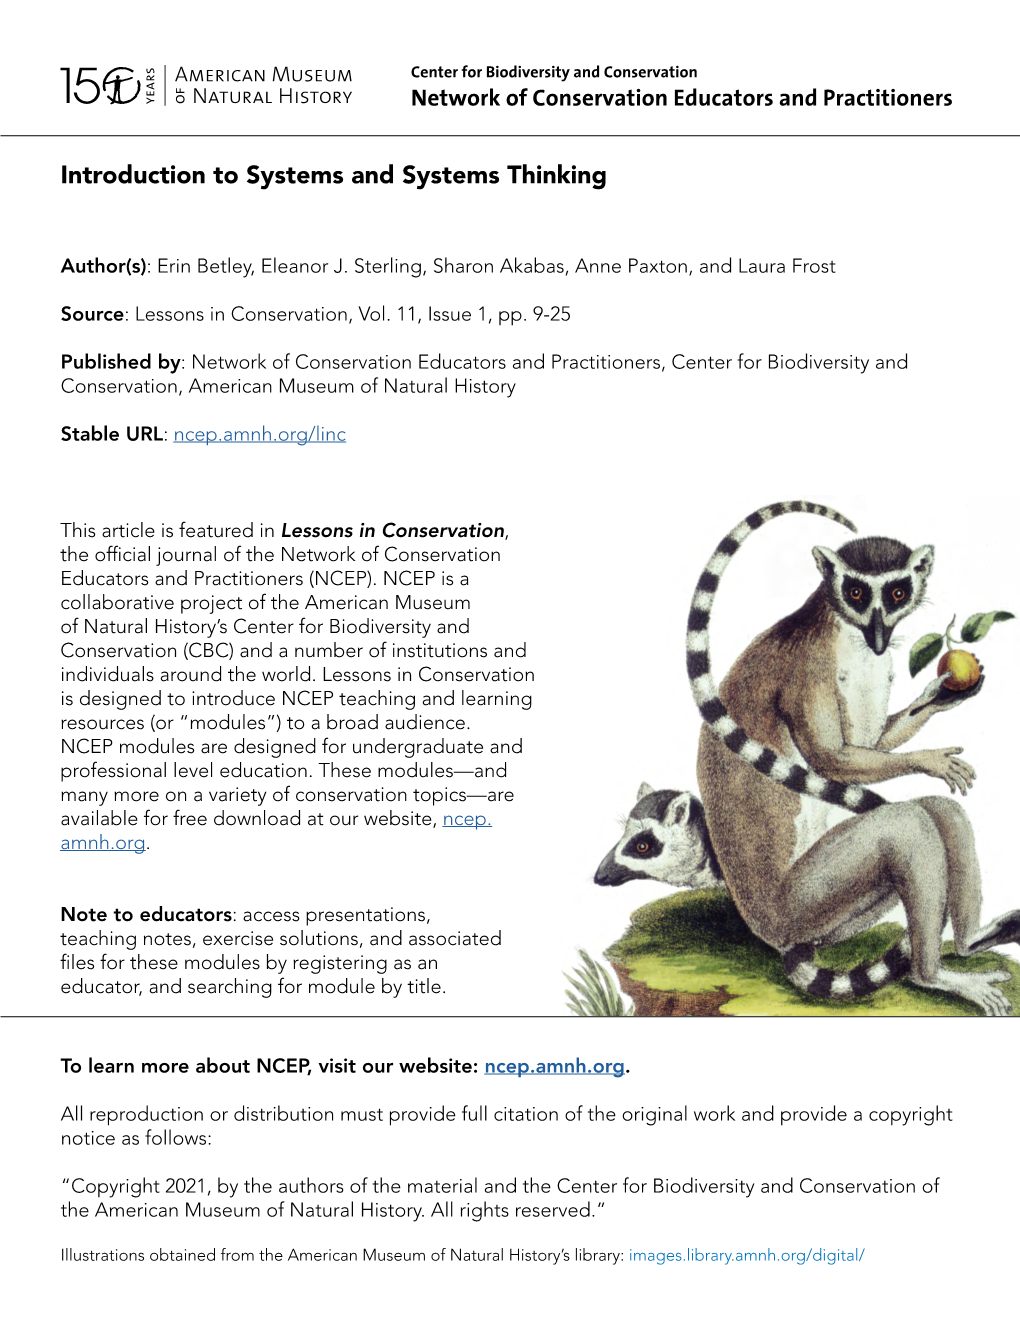 Introduction to Systems and Systems Thinking